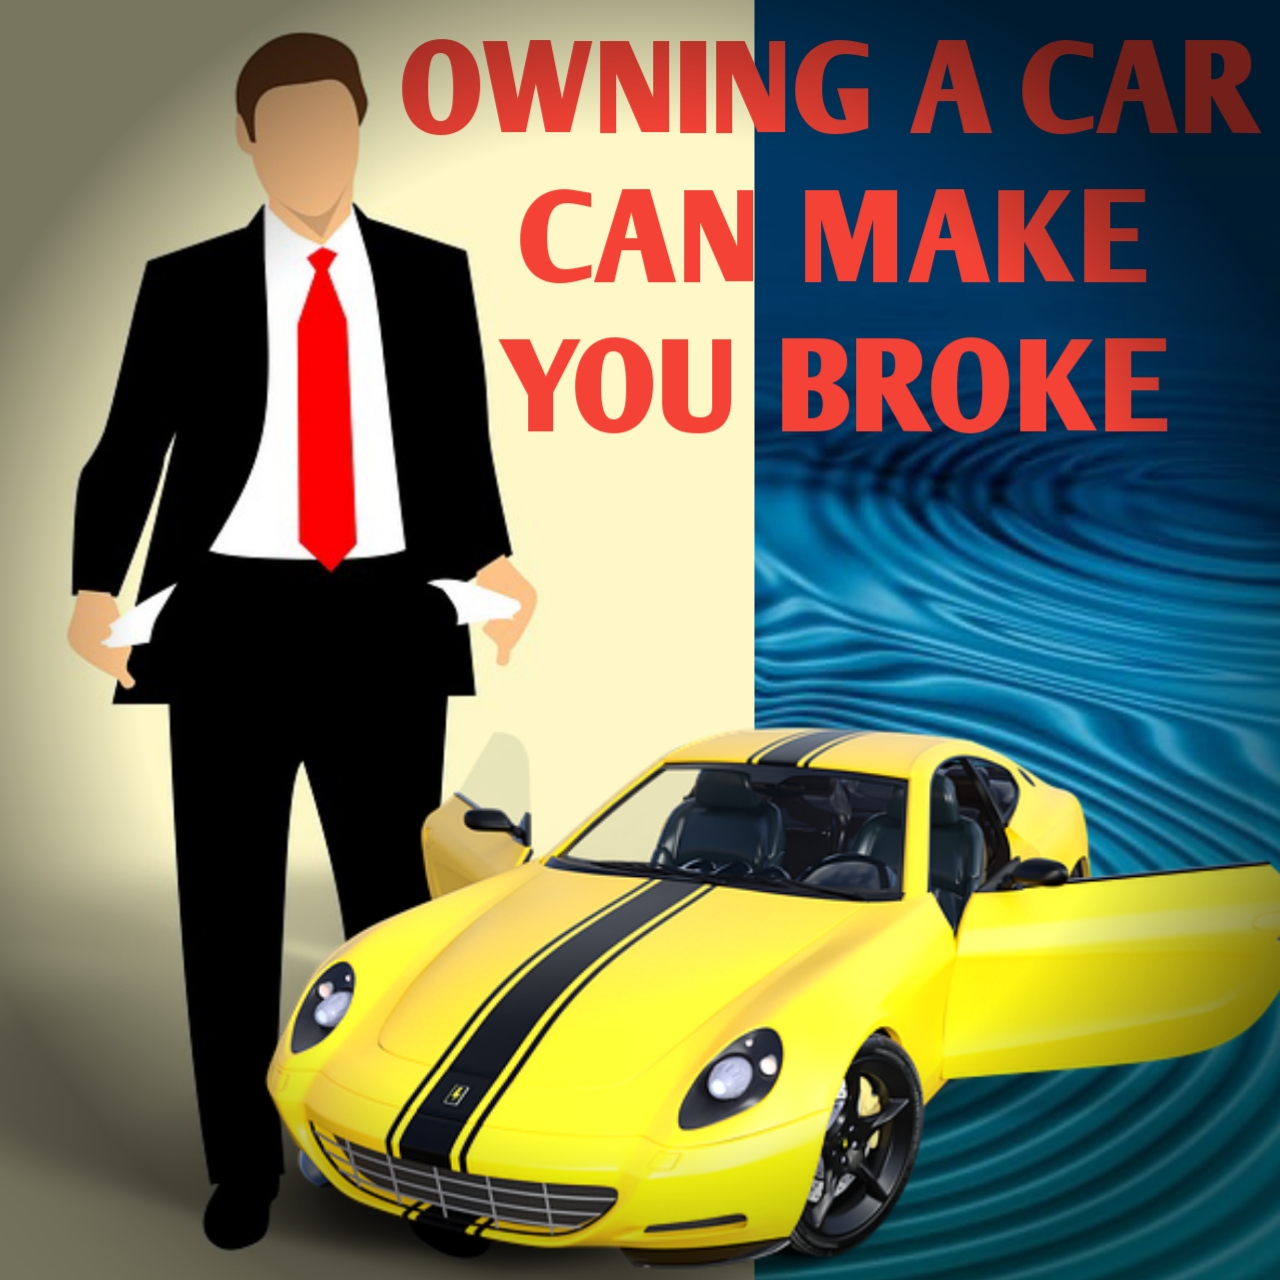 Why buying a car can make you broke